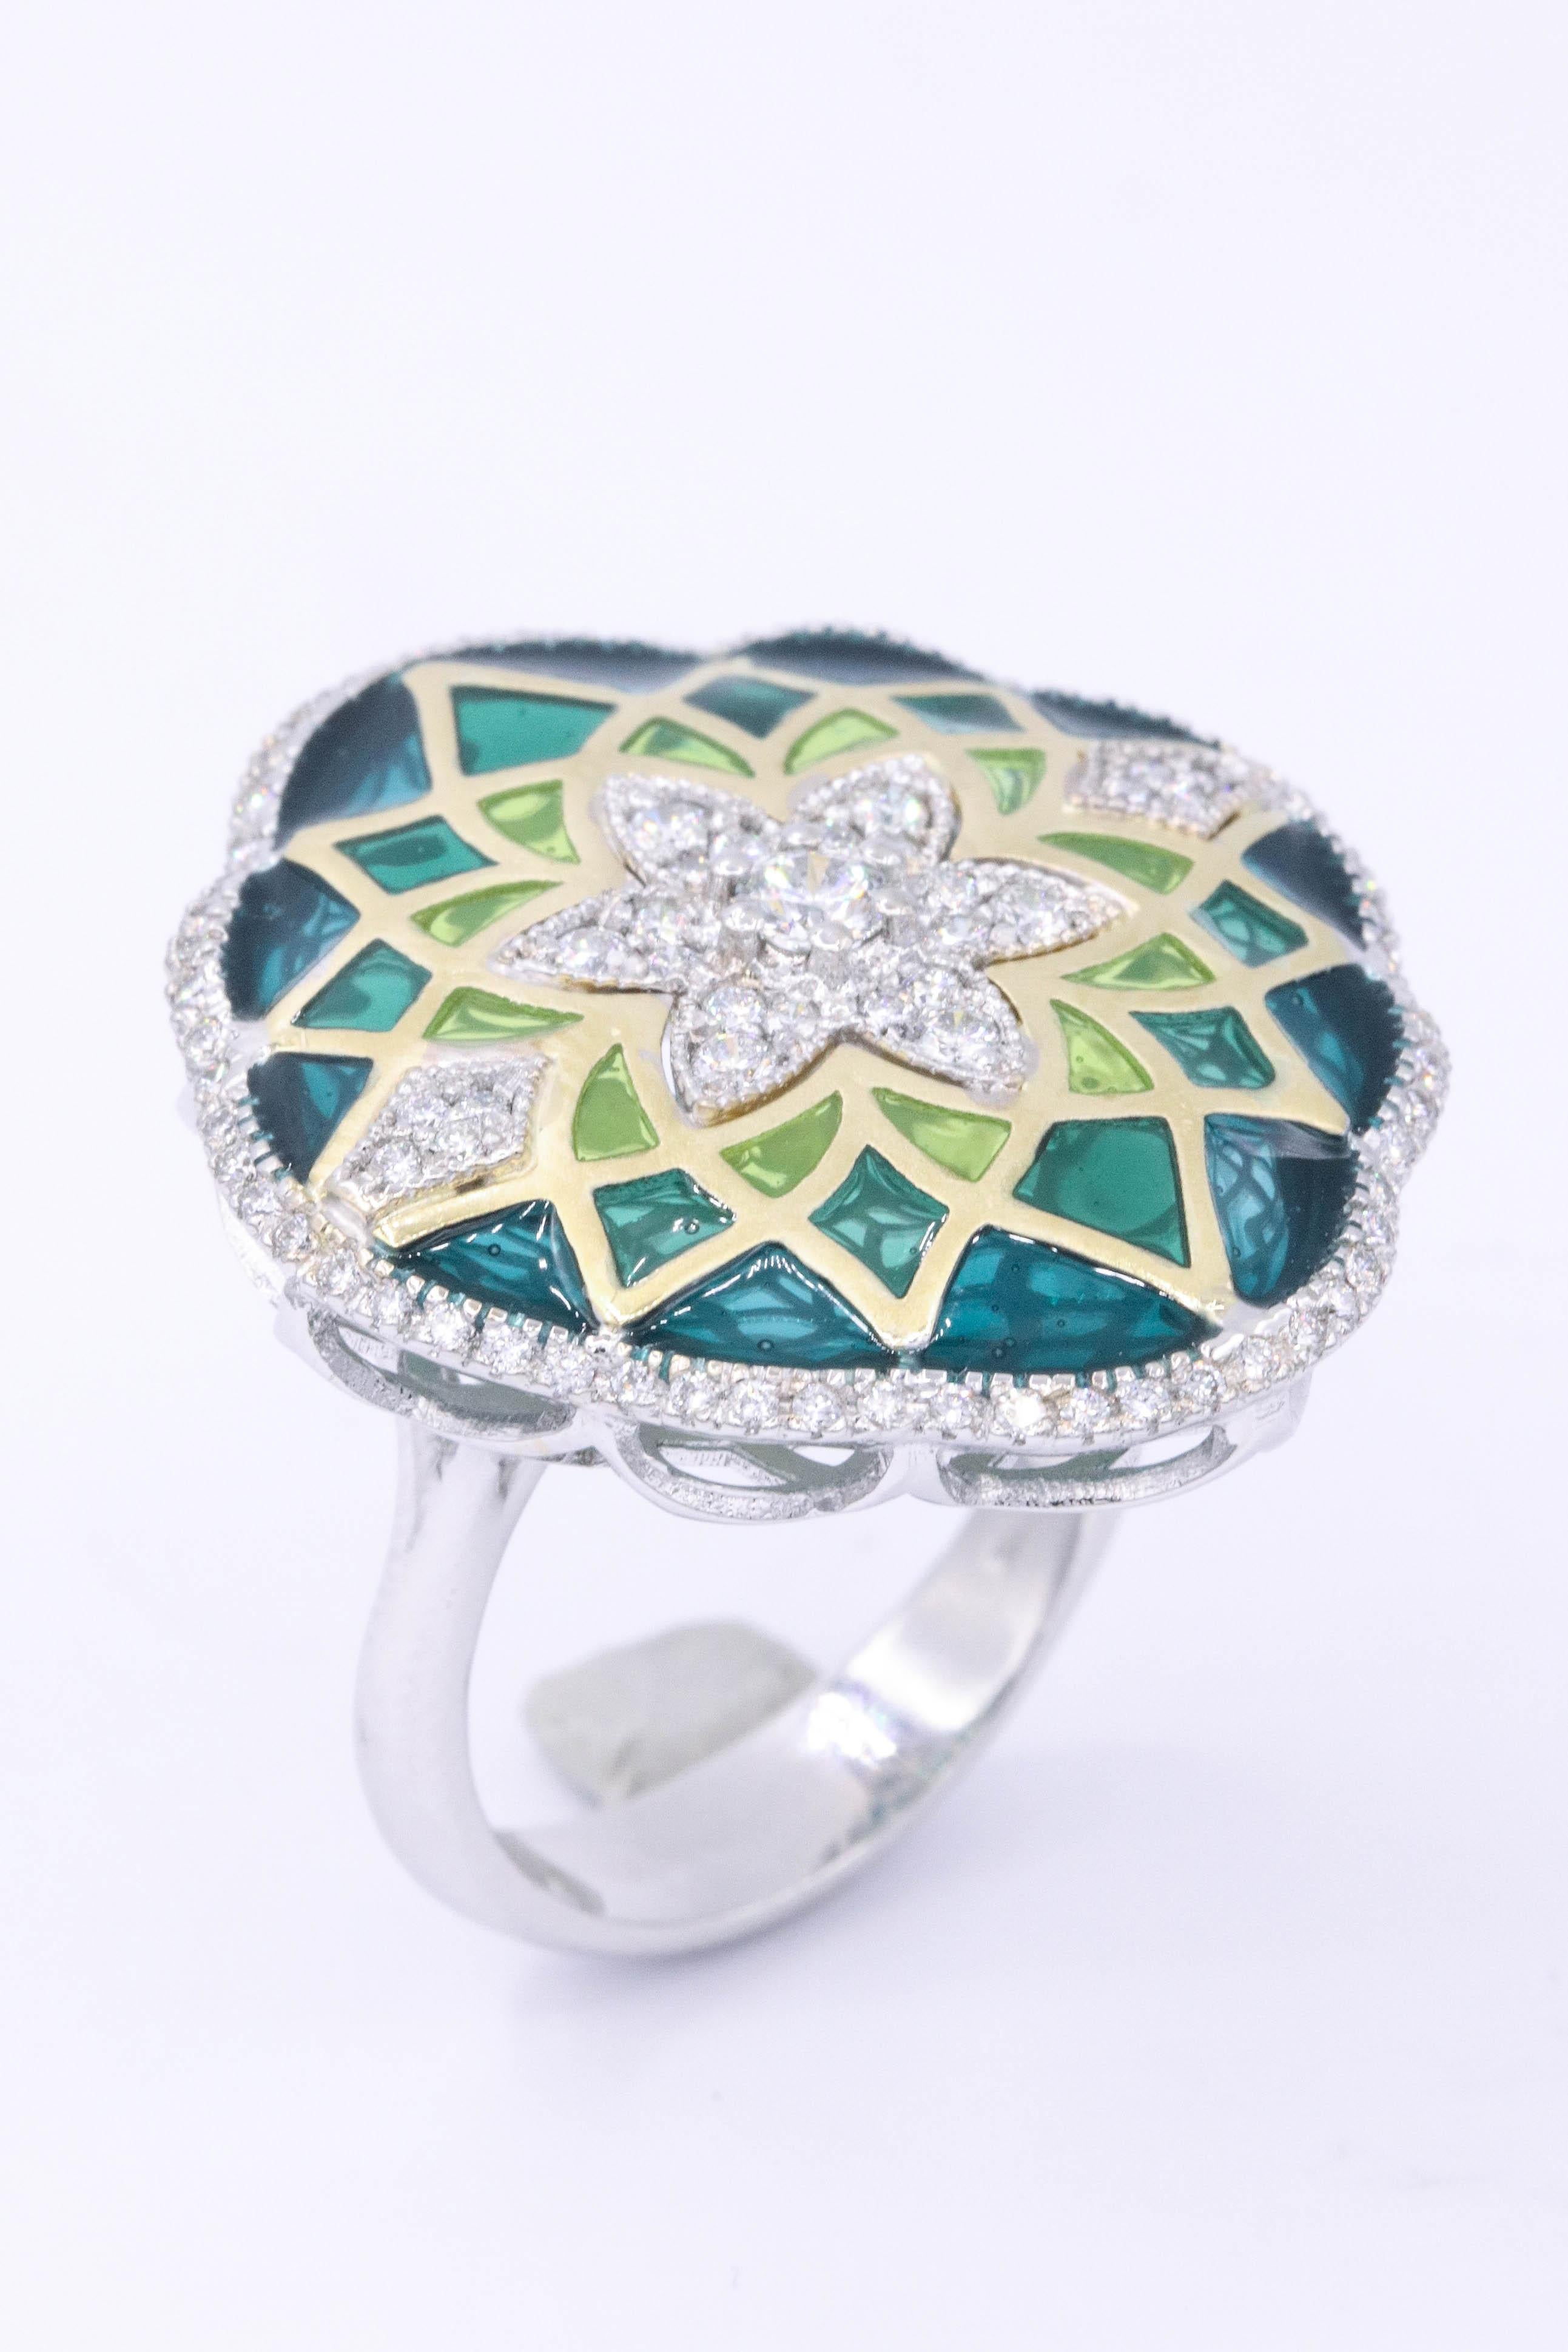 Women's Italian Green Enamel and Diamond Floral Cocktail Ring 0.73 Carats 18K